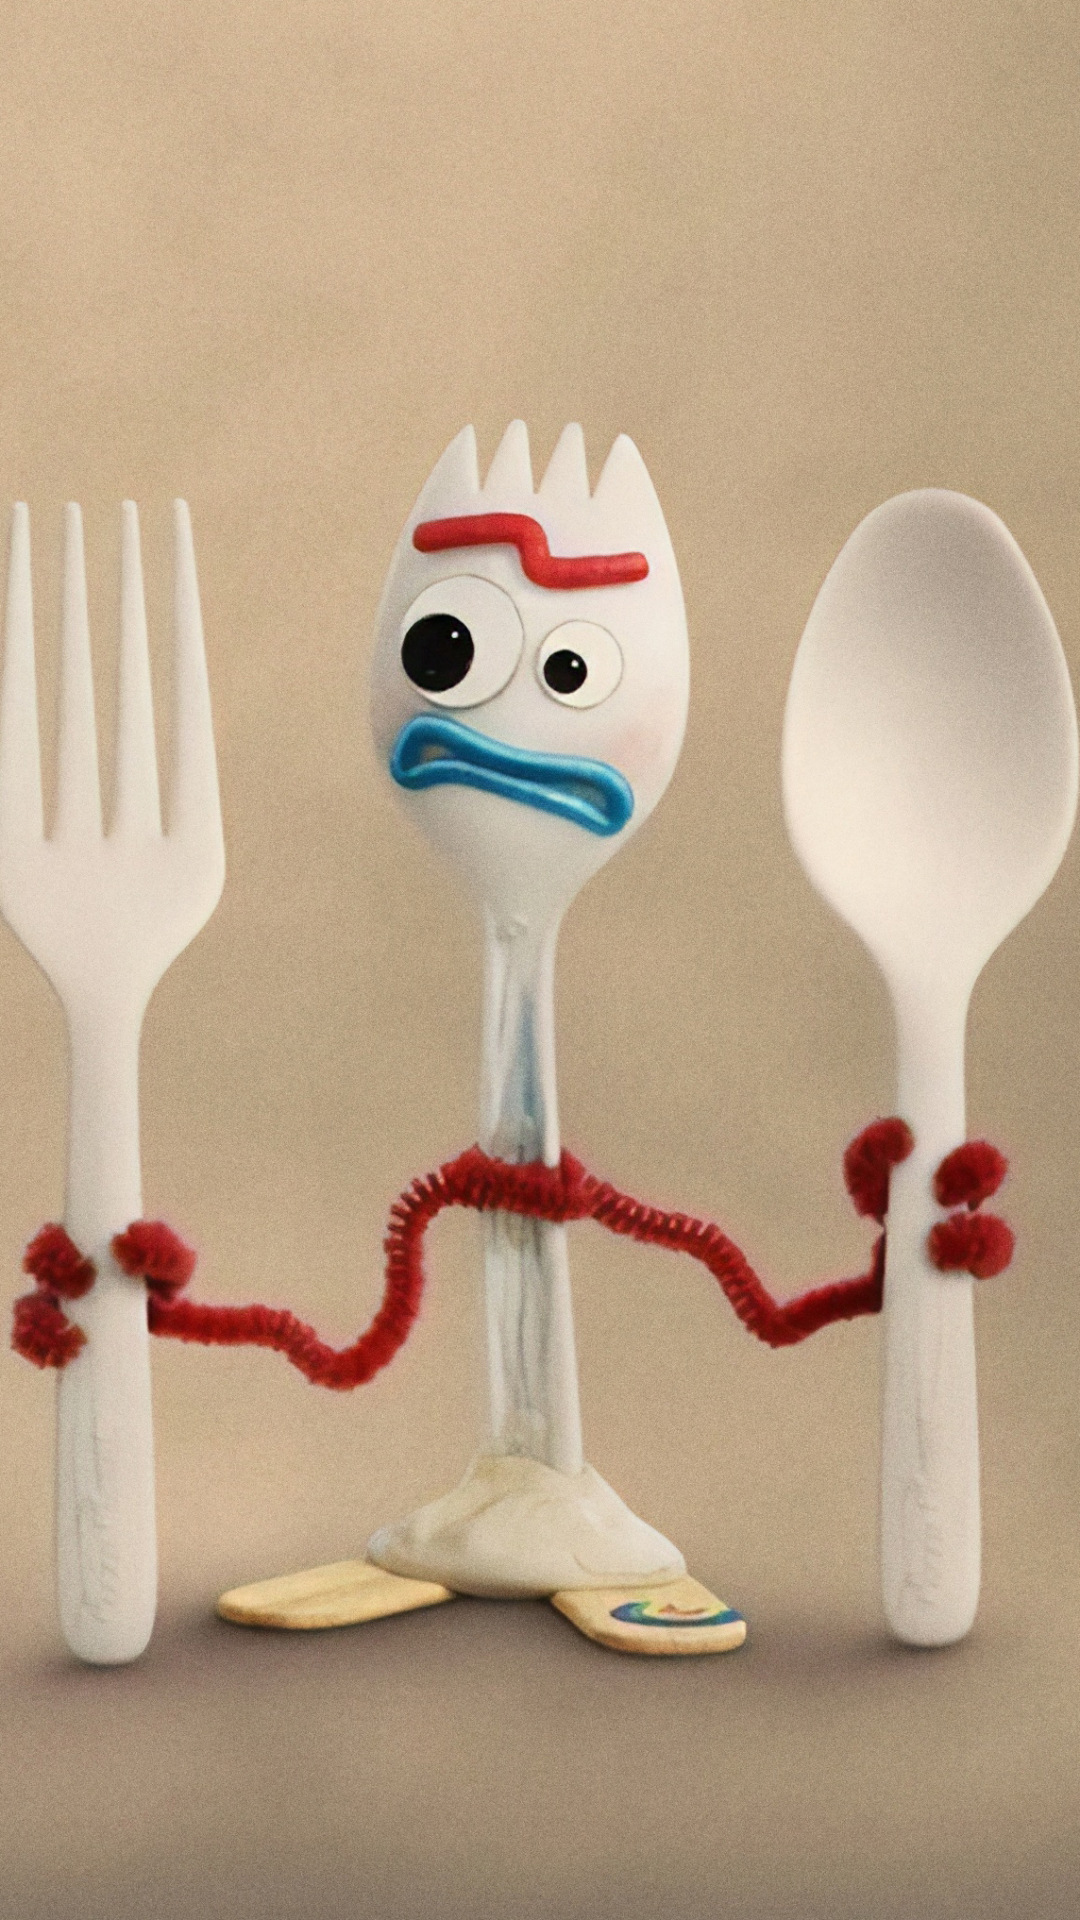 Download Toy Story Forky Epic Picture Wallpaper, Wallpapers.com